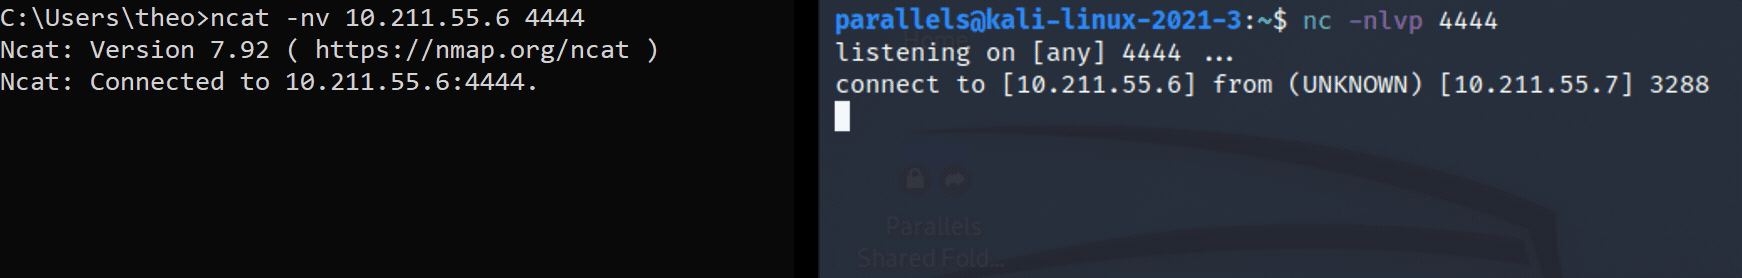 A GIF showing both Windows CLI (left) and Kali CLI (right) connecting via netcat commands. Kali VM set up to listen on port 4444 and Windows VM connecting to the listening port 4444. Once connection is made the GIF shows messages being sent and received by both machines using the connection.